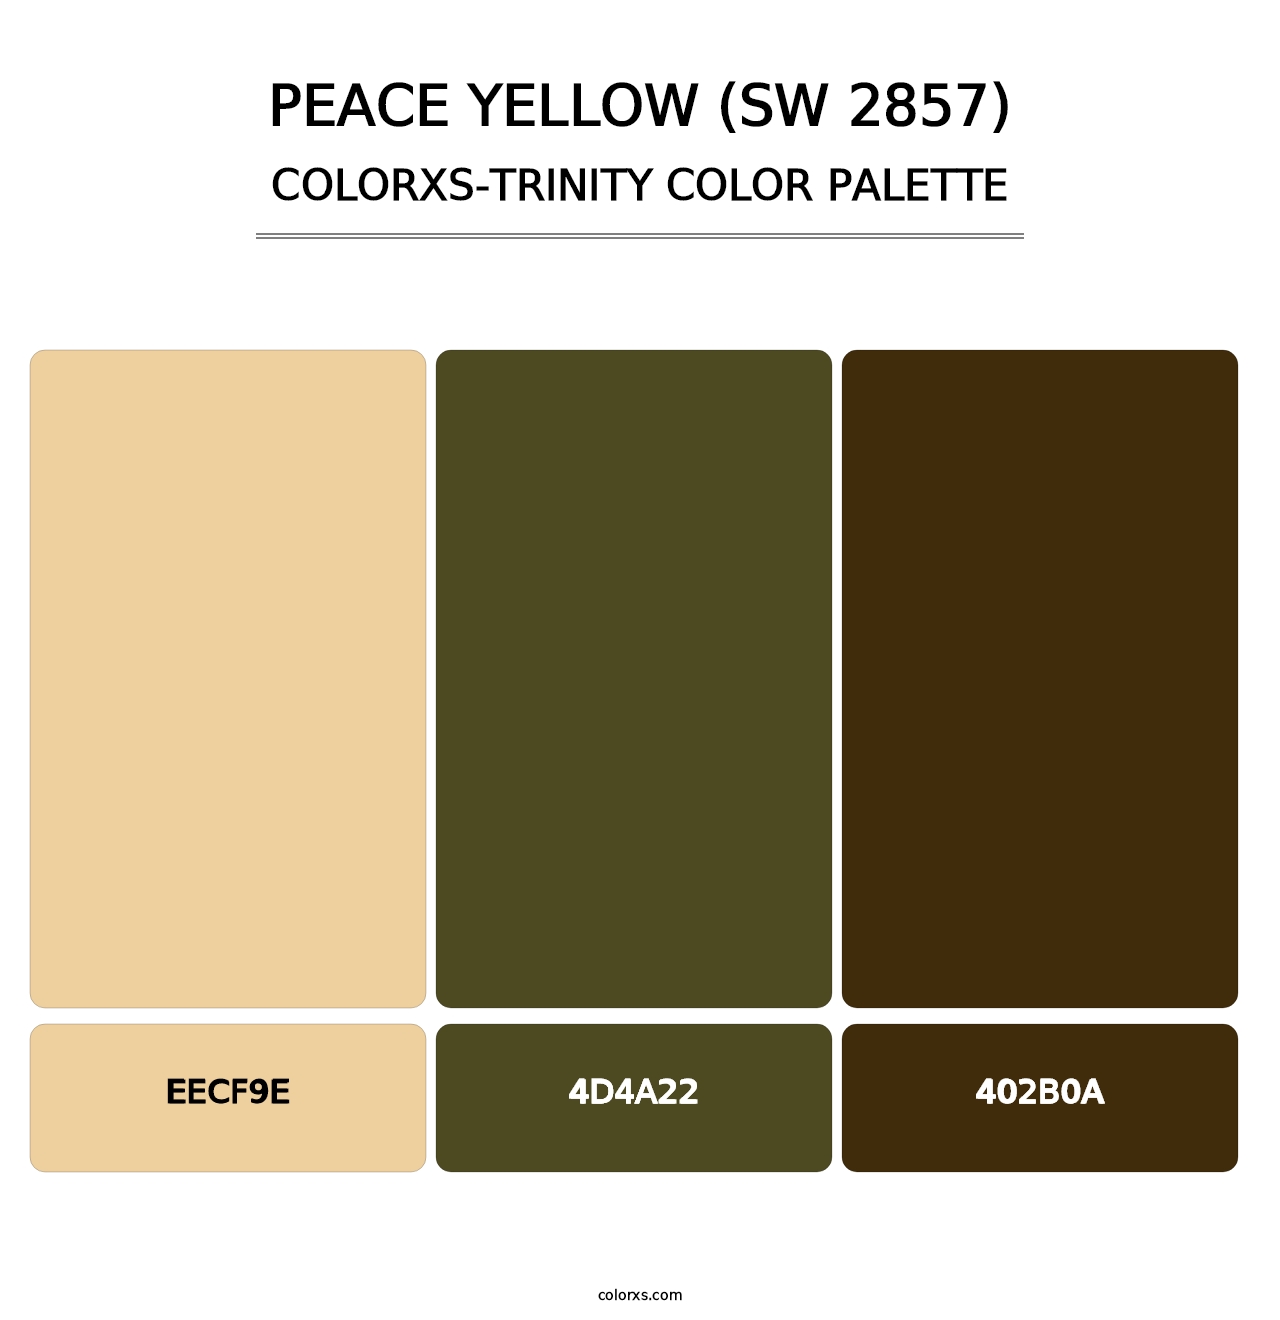 Peace Yellow (SW 2857) - Colorxs Trinity Palette